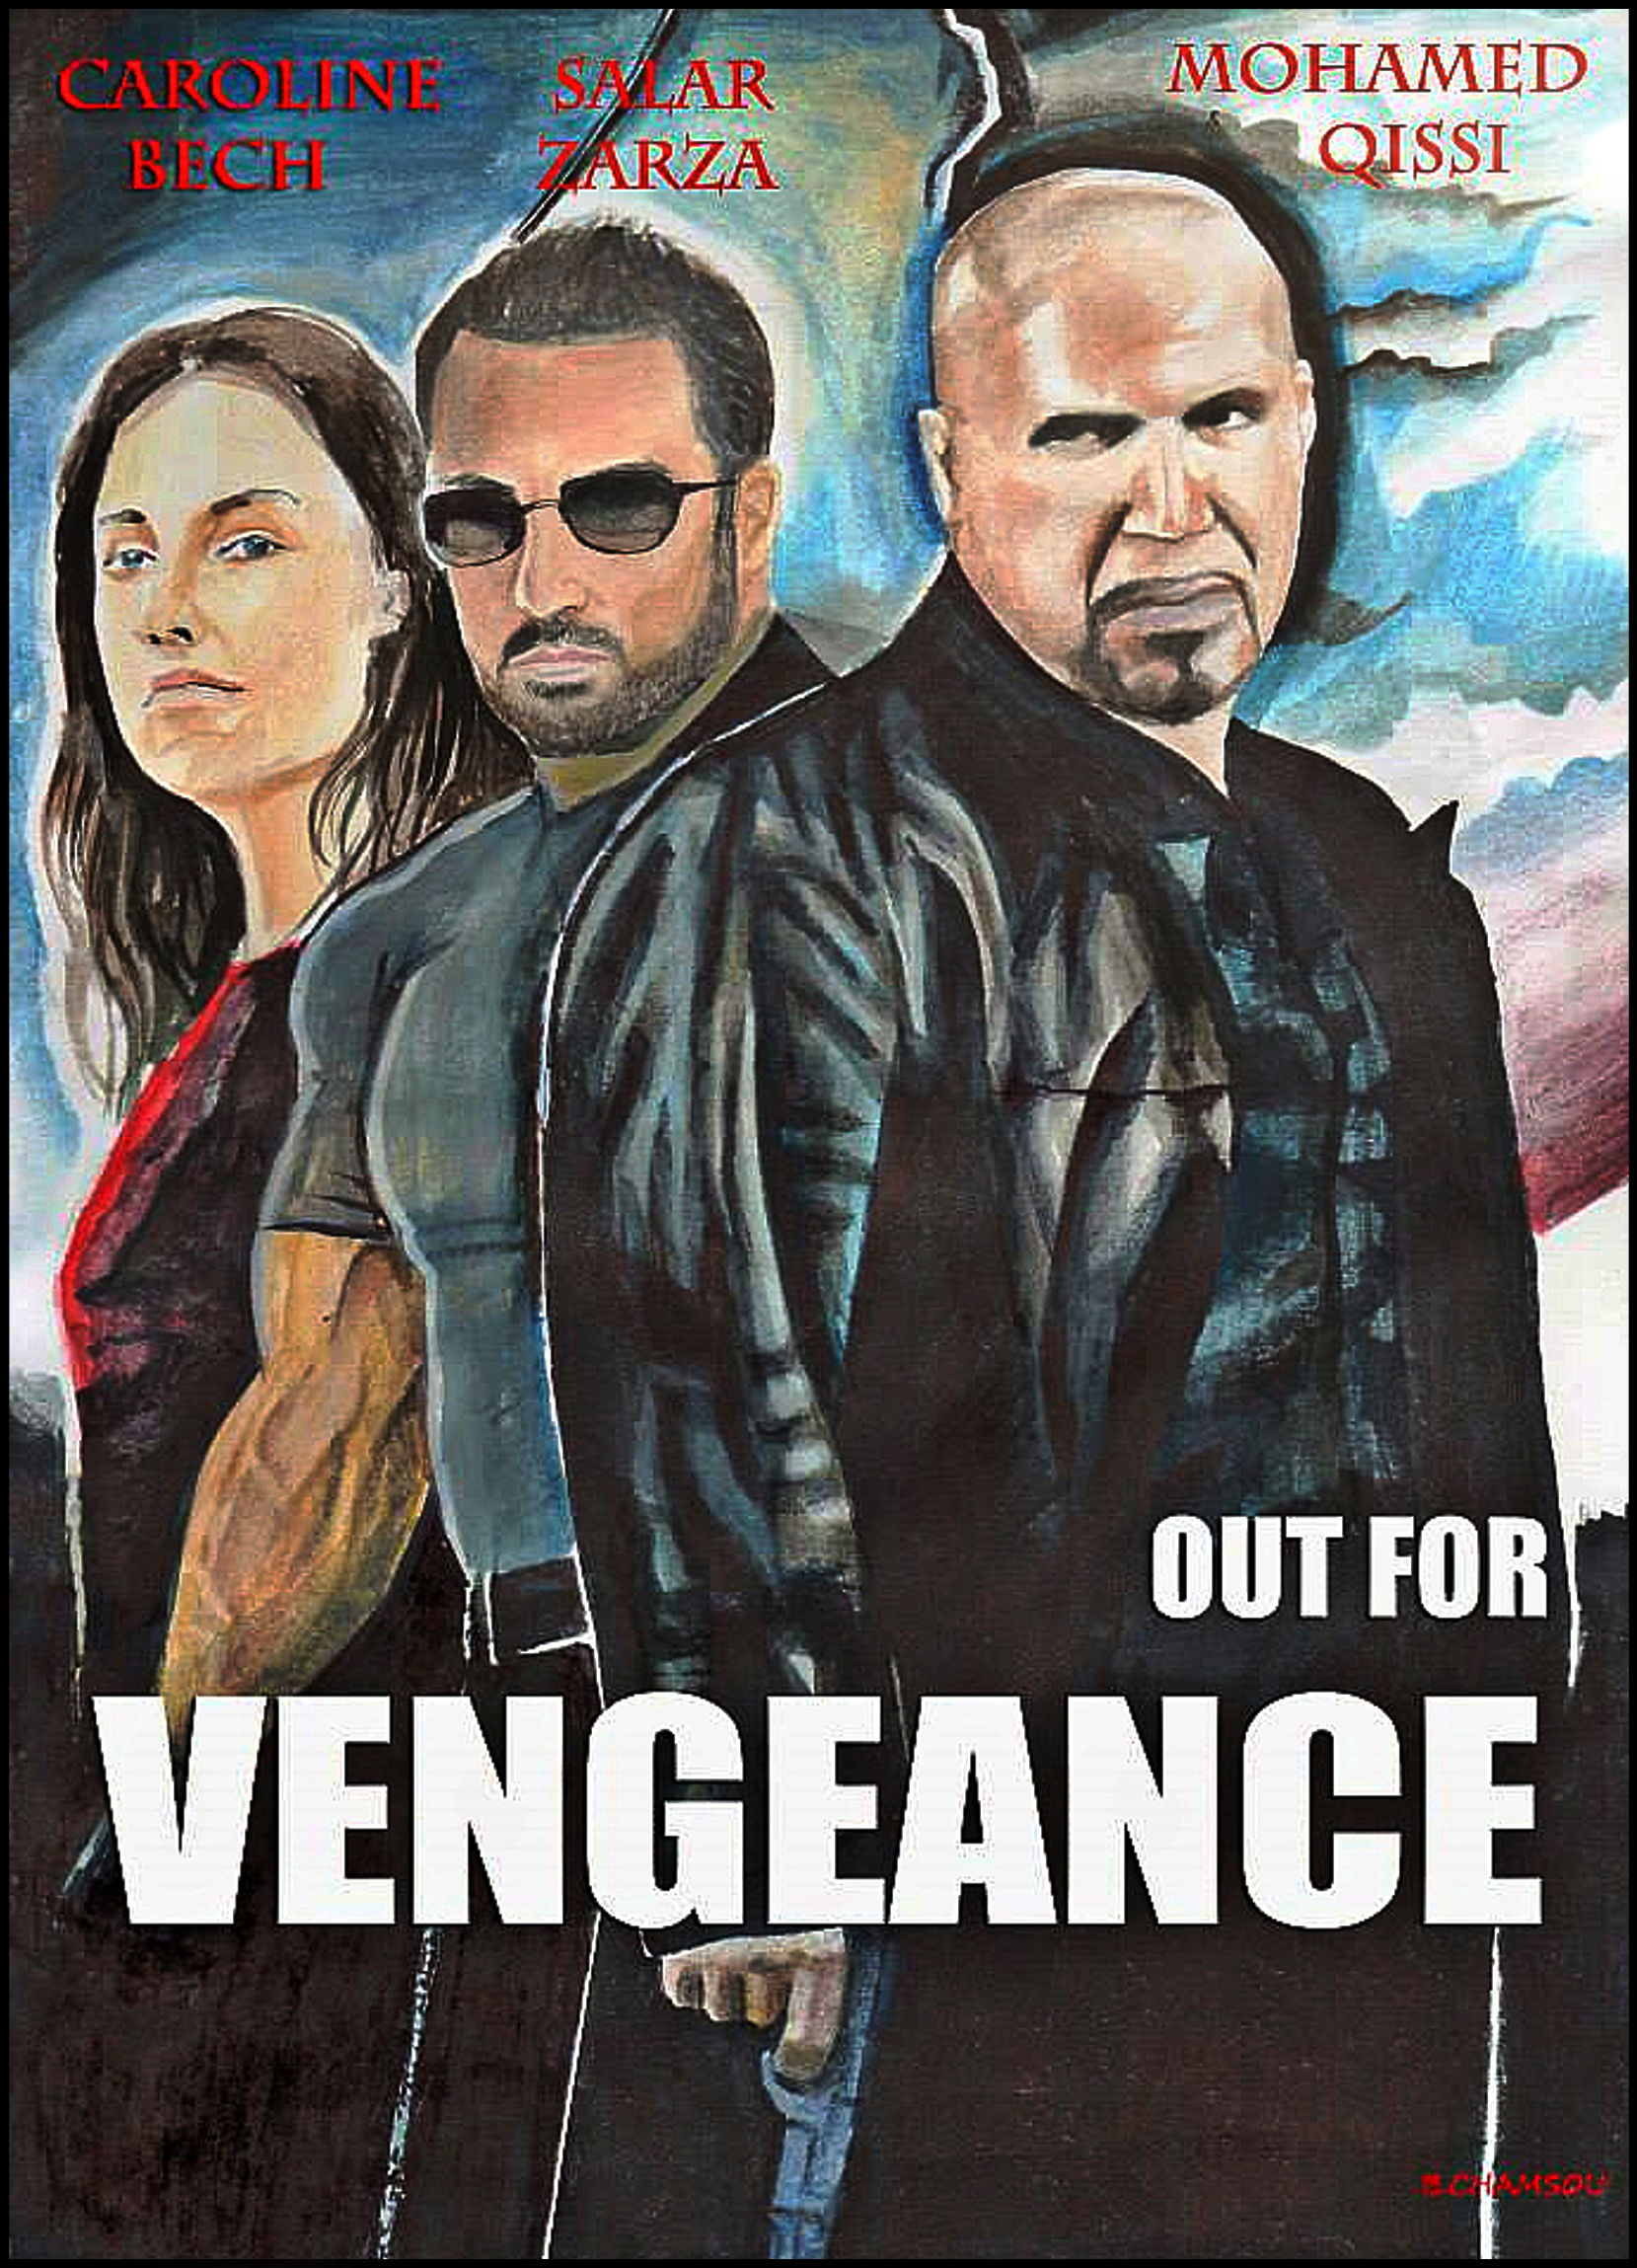 OUT FOR VENGEANCE (2015) 88 min. action/thriller feature.(Loc: NL/Morocco)